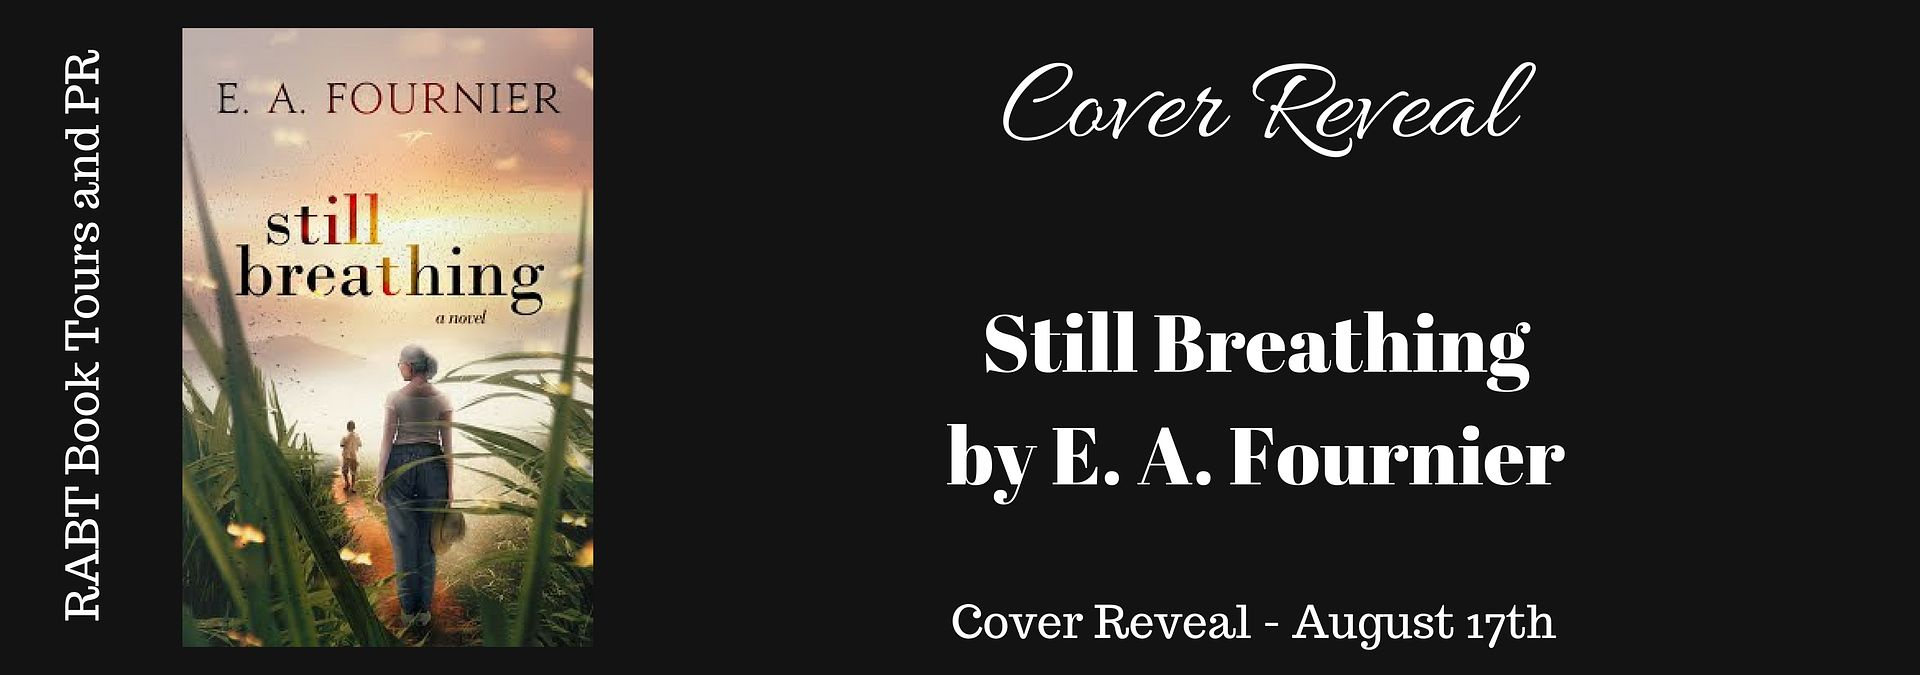 Cover Reveal: Still Breathing by E.A. Fournier #womensfiction #coverreveal